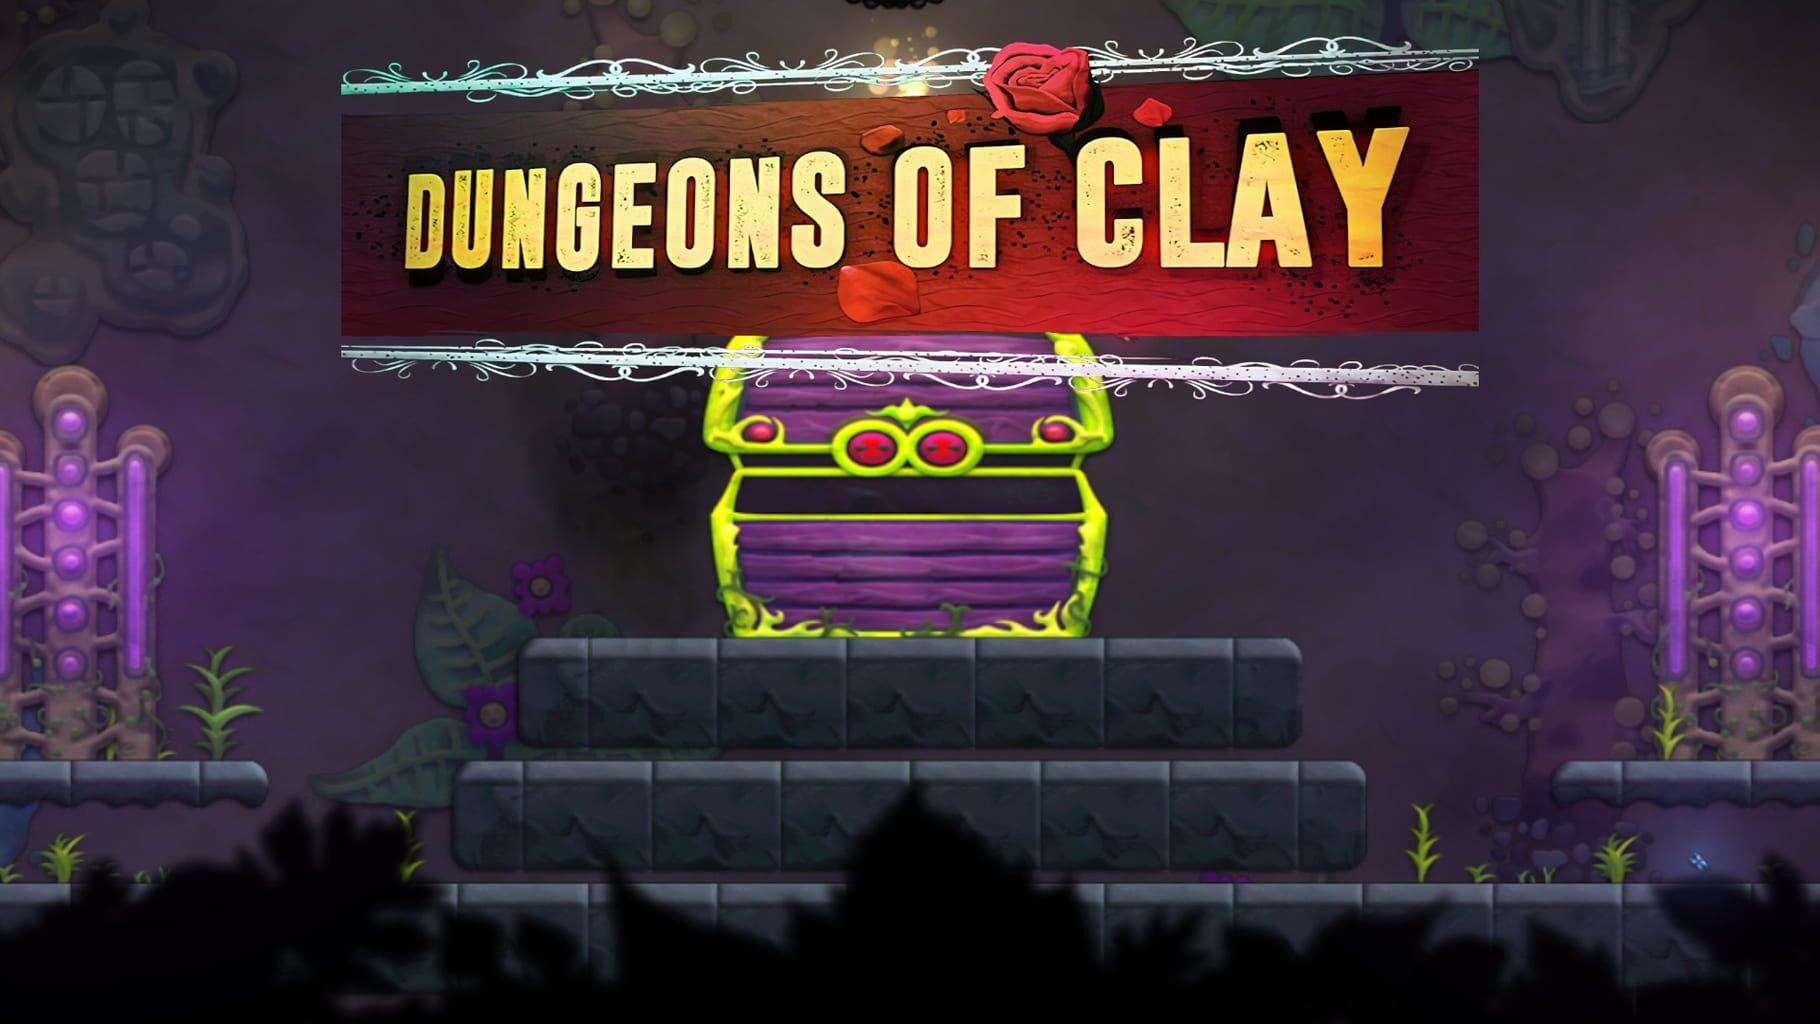 Dungeons of Clay artwork